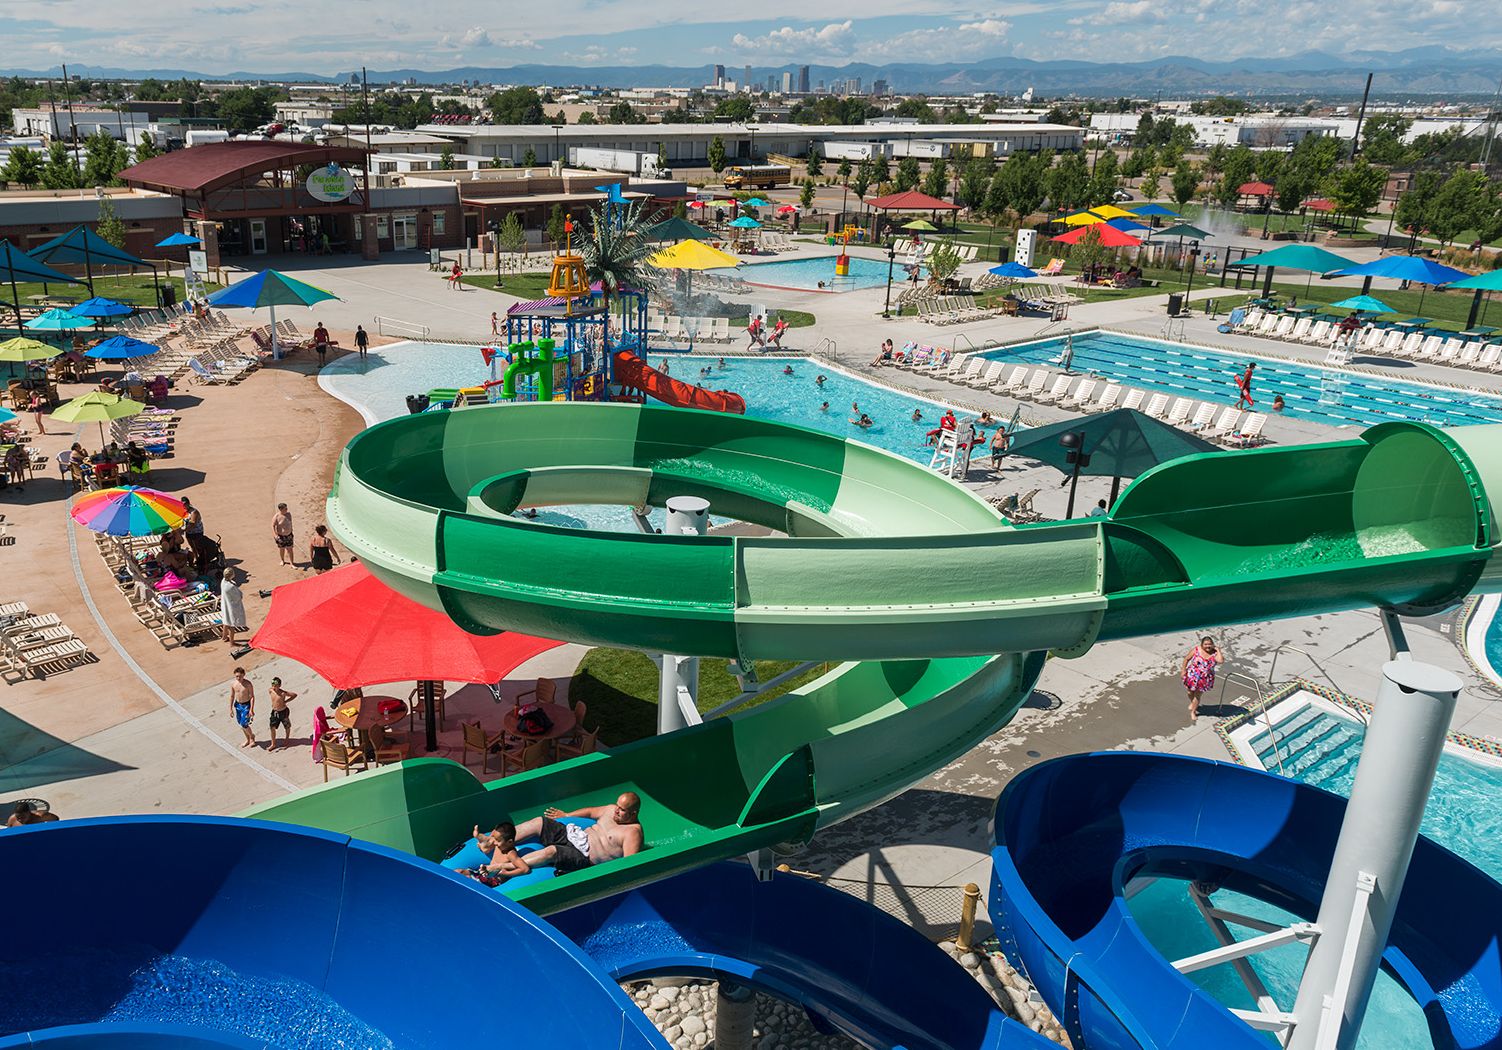 Overview of water park